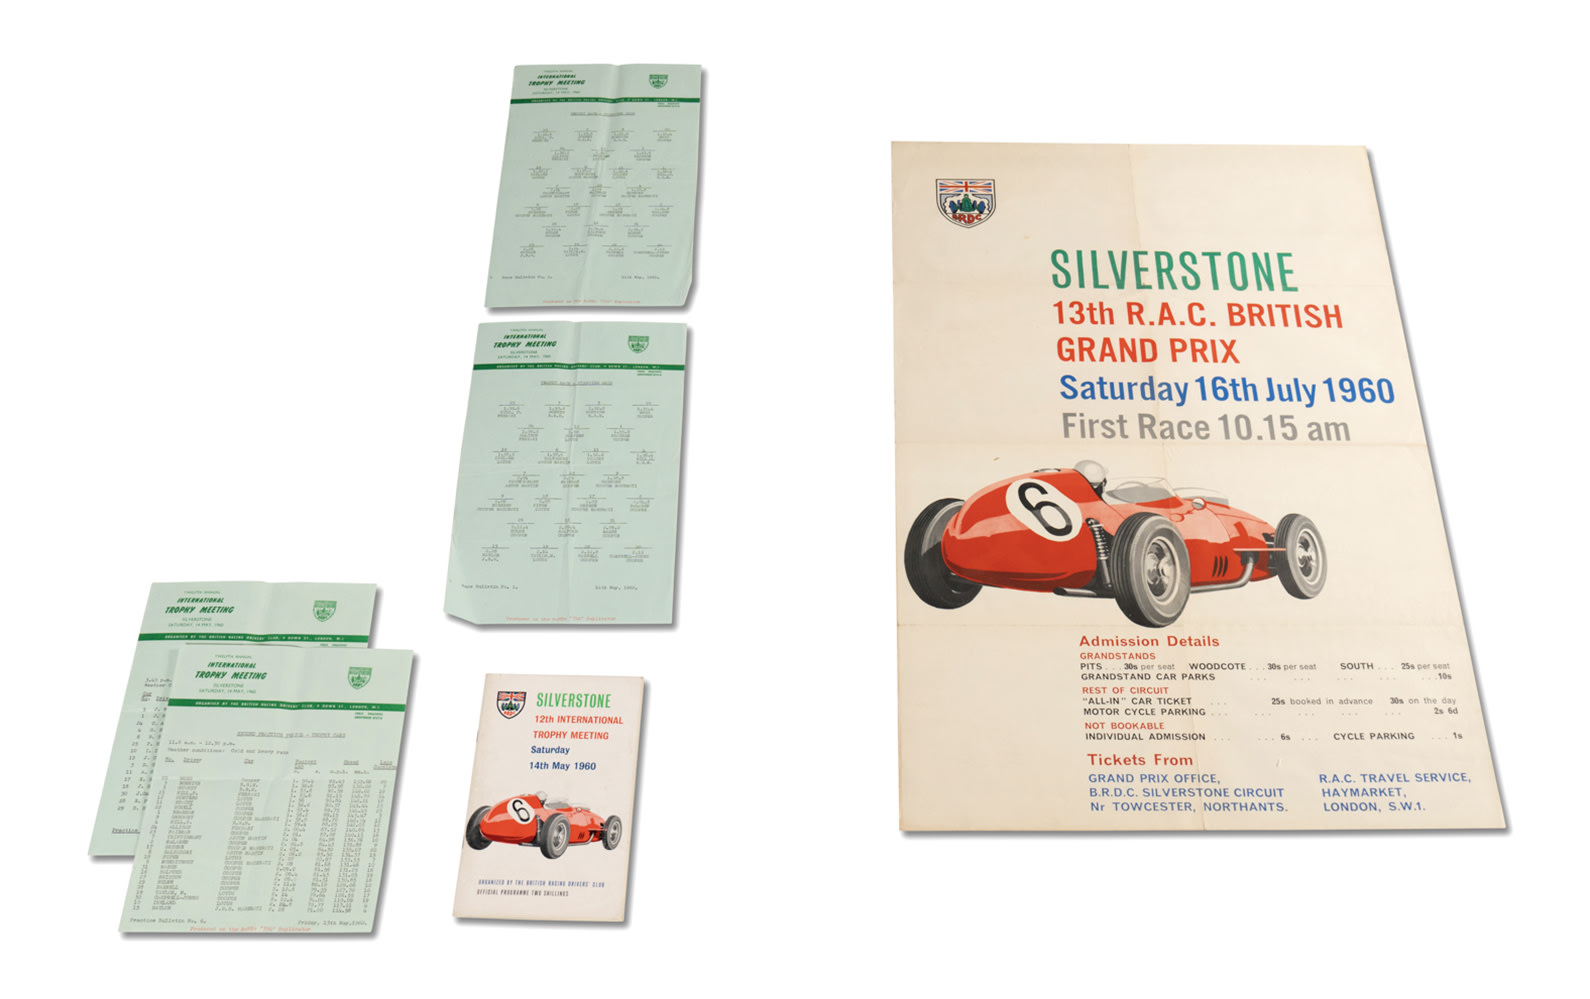 1960 Silverstone 12th International Trophy Meeting Official Race Program, Timing Sheet, and Poster